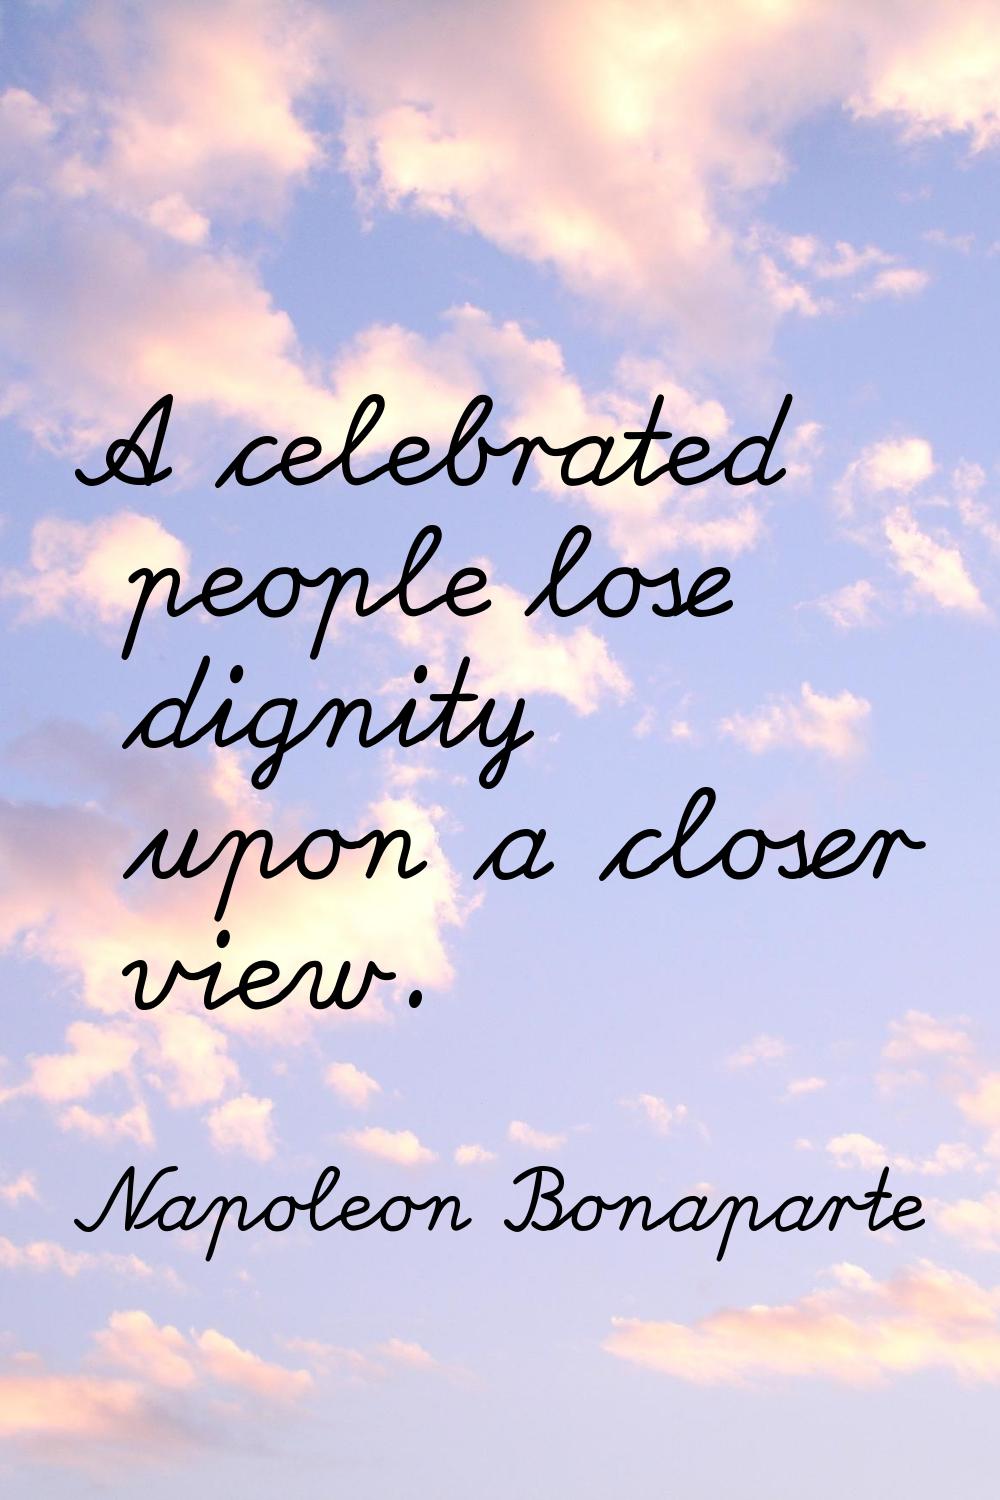 A celebrated people lose dignity upon a closer view.